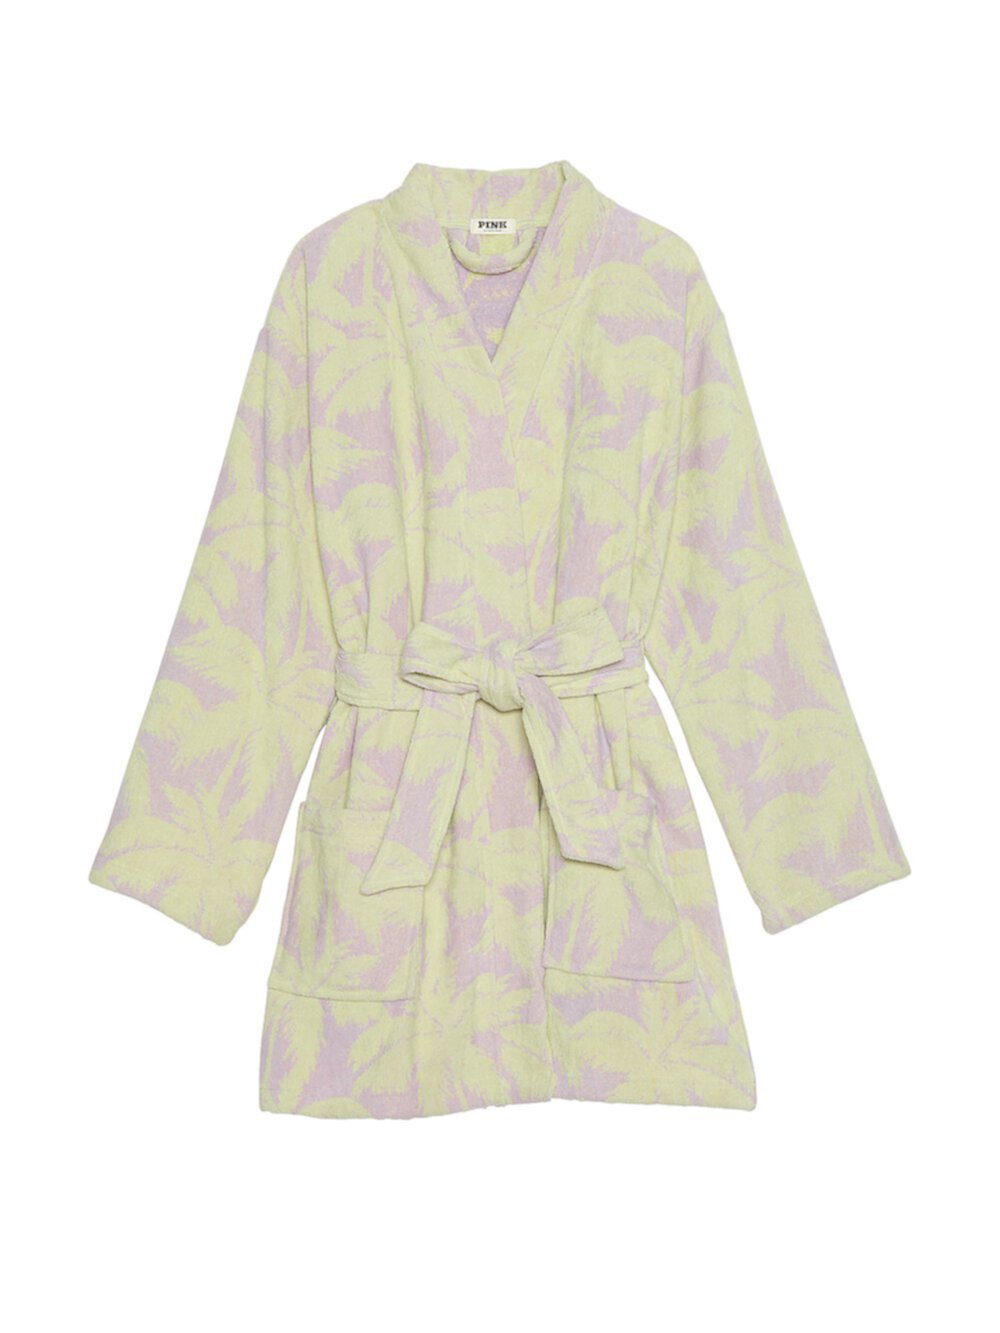 The Terry Towel Robe Pink